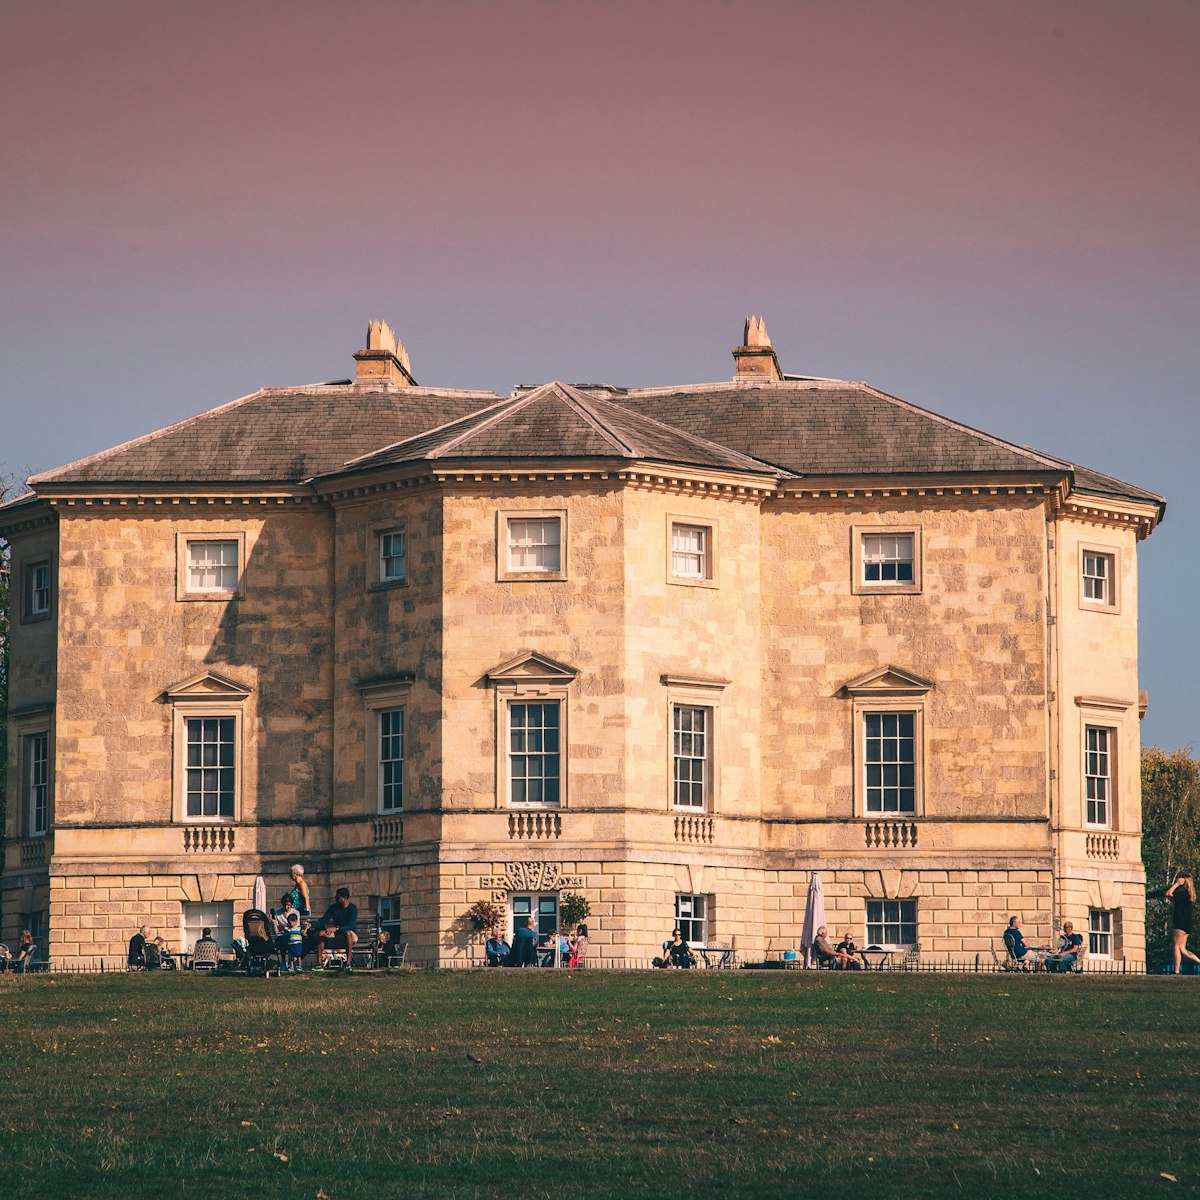 Welling, London,UK - Sept 20 2020: Danson House in Danson Park. Danson House is a Palladian Mansion Grade 1 listed. Sometimes used for weddings.; Shutterstock ID 2004929534; your: Bridget Brown; gl: 65050; netsuite: Online Editorial; full: POI Image Update